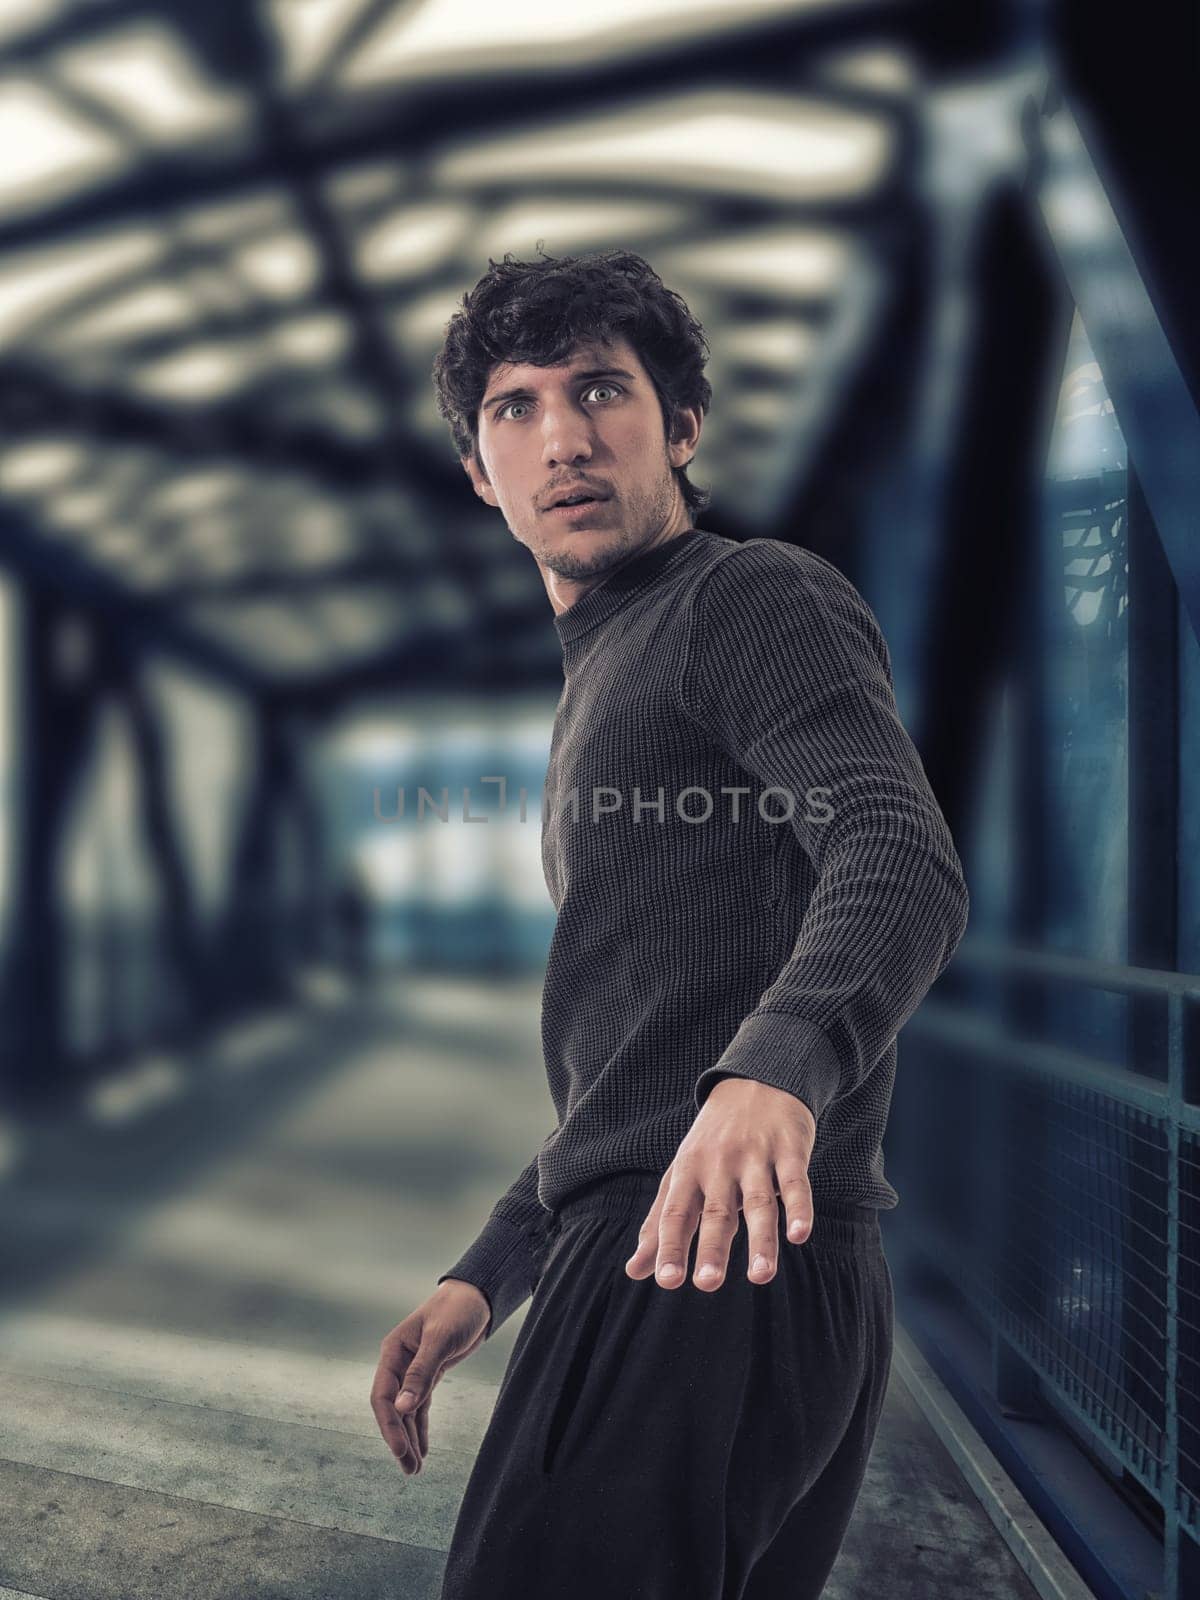 A young man standing on a bridge, running away looking scared or worried, ready to flee